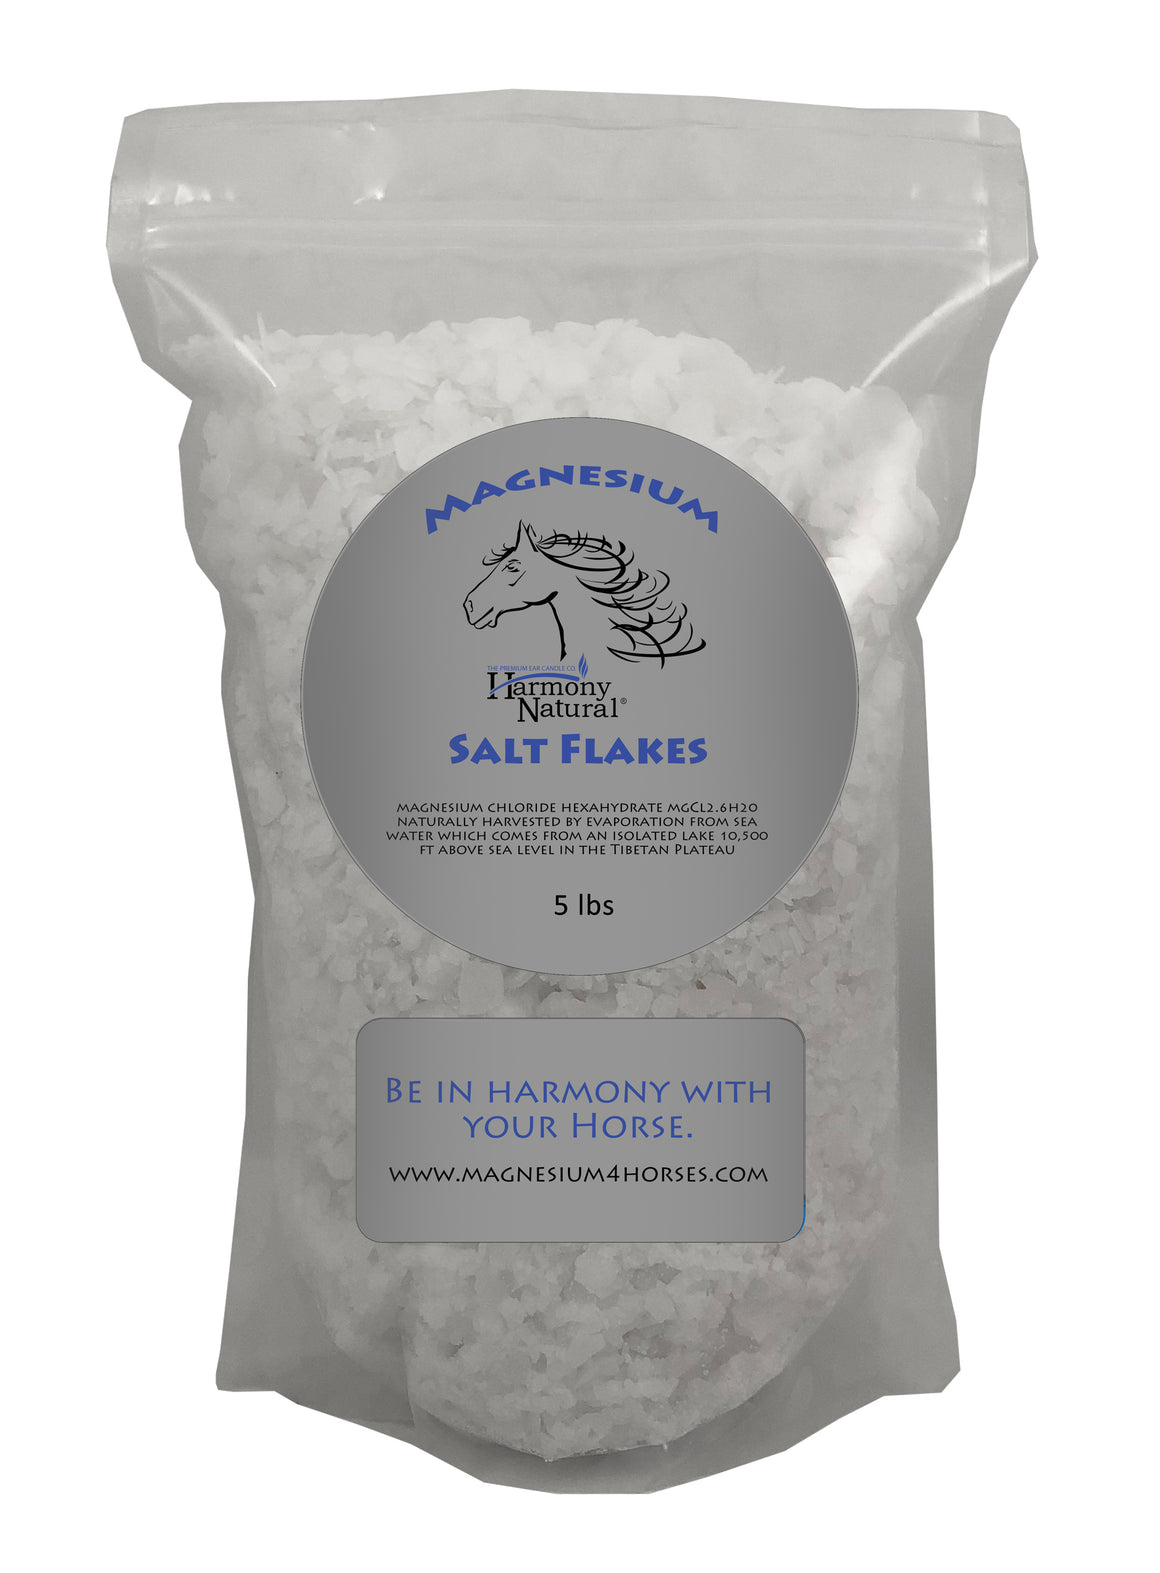 Magnesium Mg flakes for horses 5 lbs